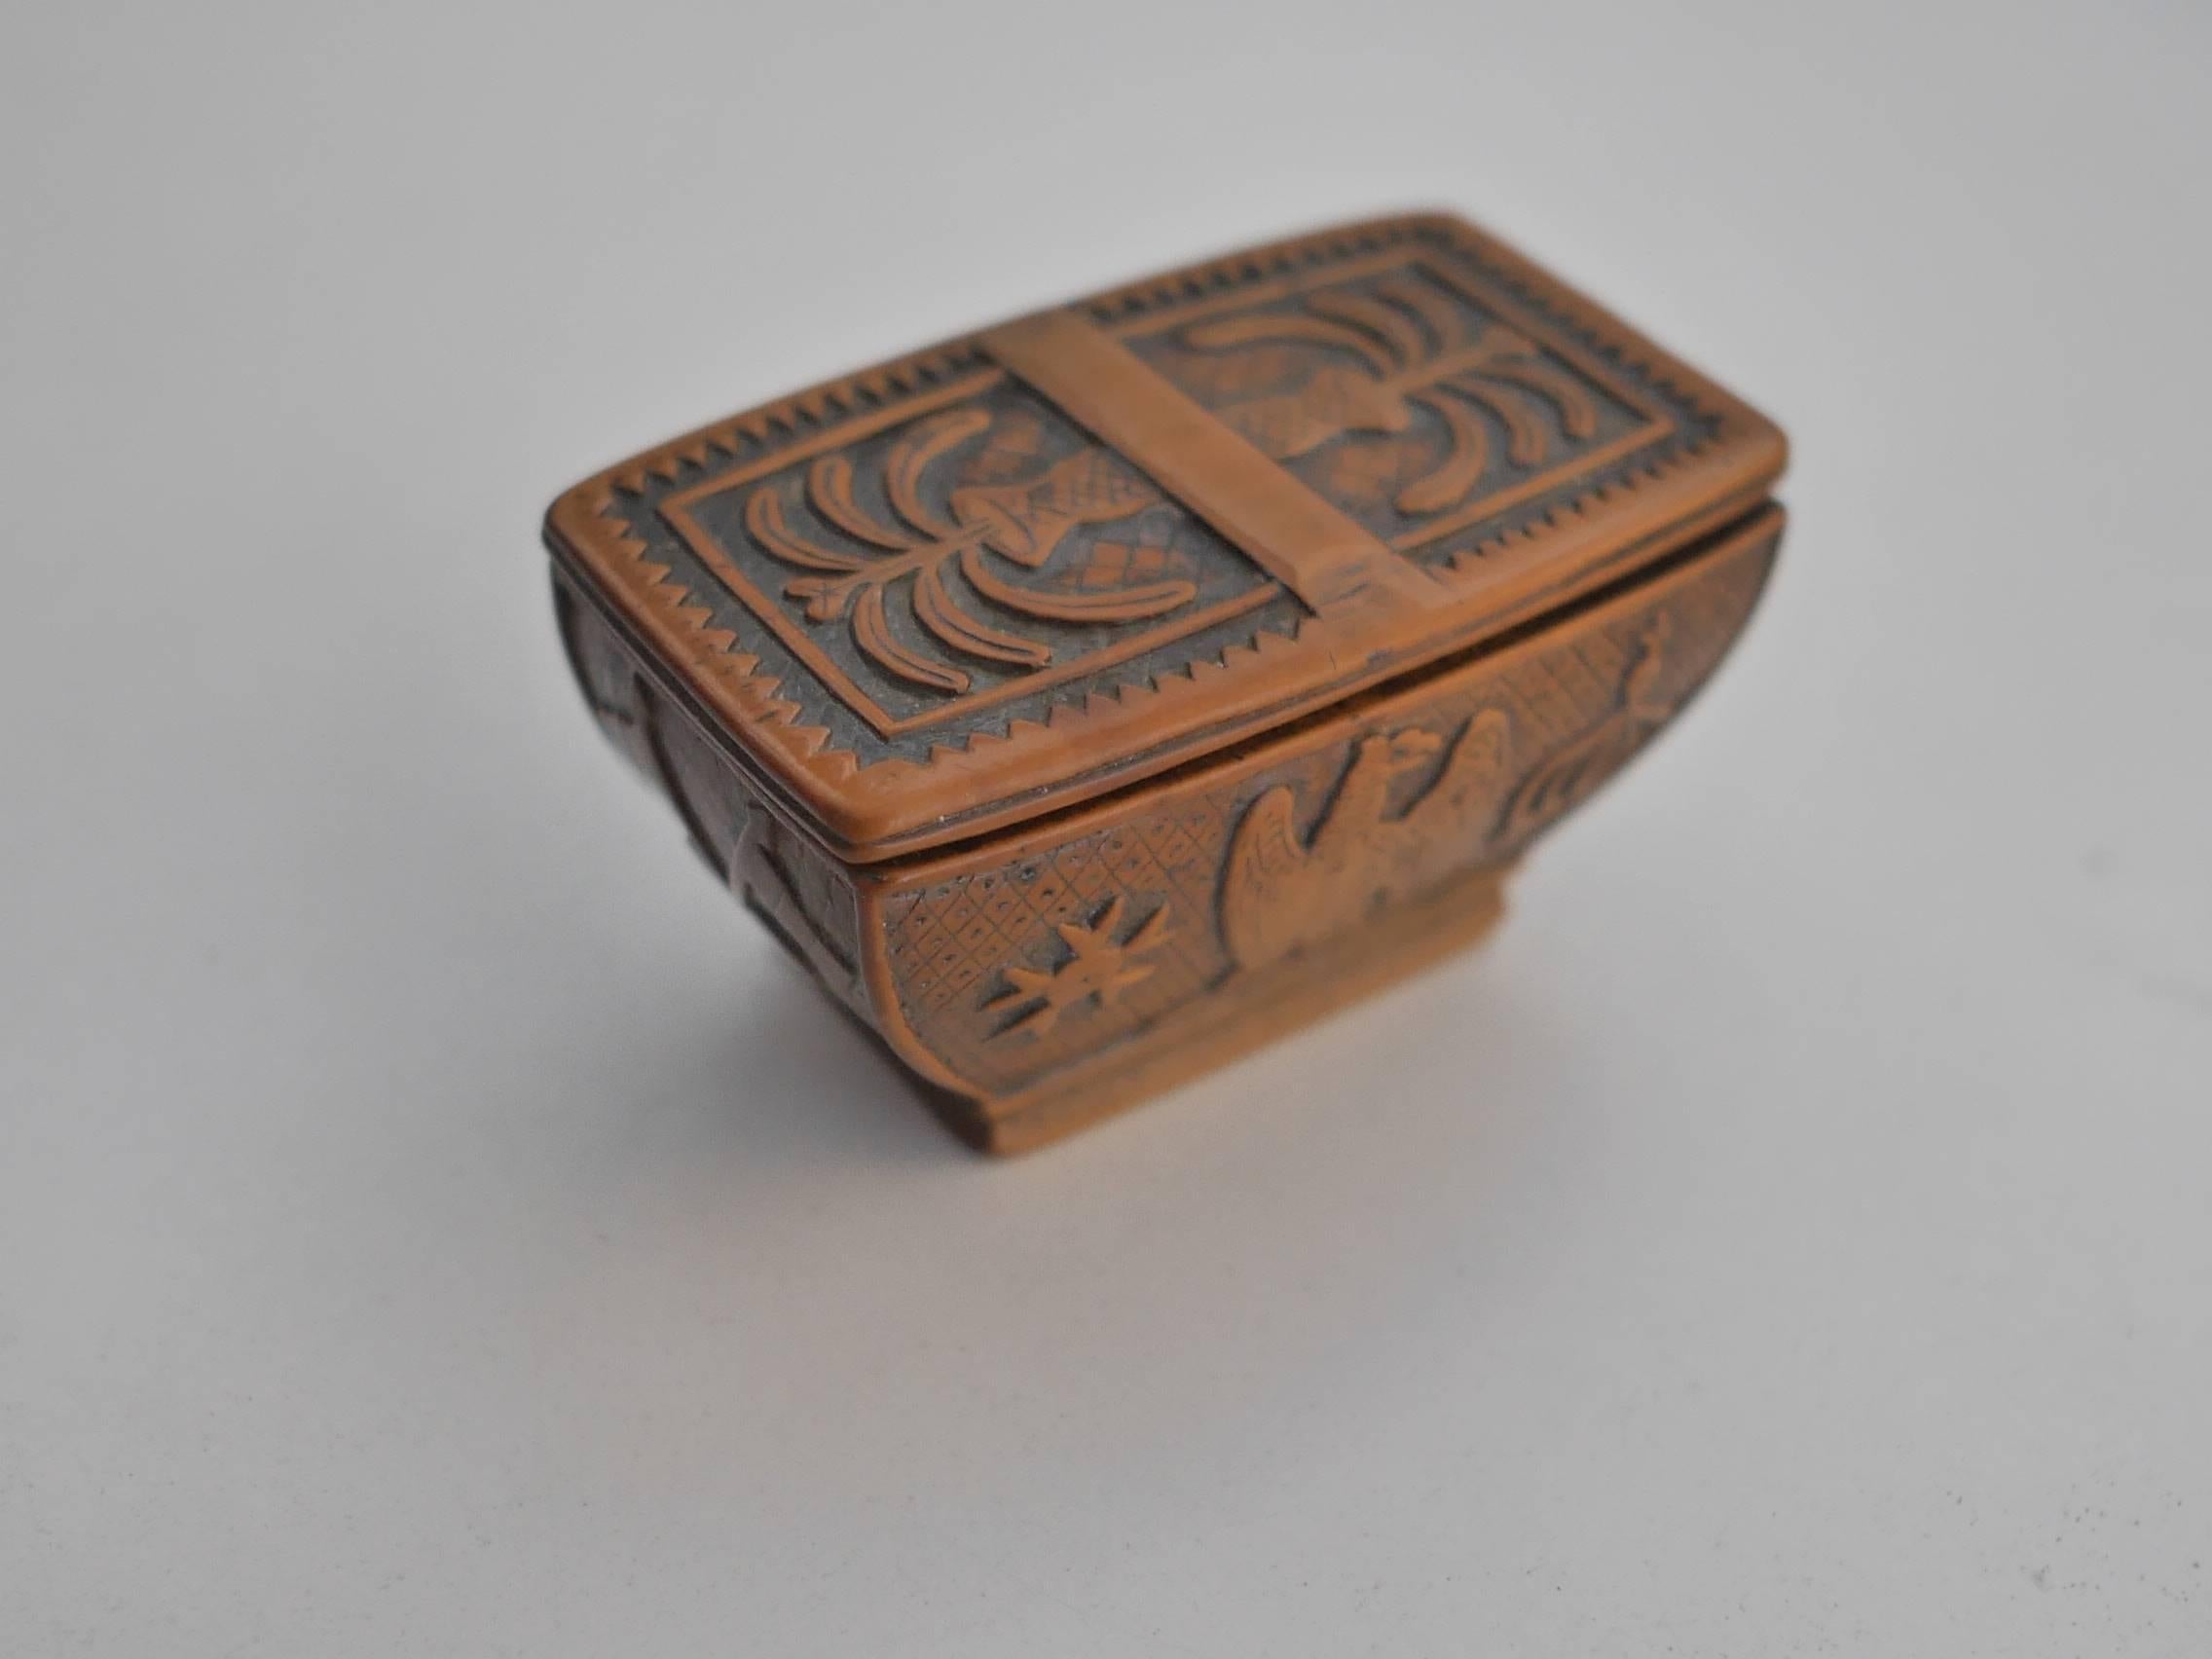 Rare little snuffbox carved in the shape of Napoleon's coffin. Various details engraved all around the box are related to the conqueror: eagle, crown, crossed guns, crossed flags, a heart and his initial 